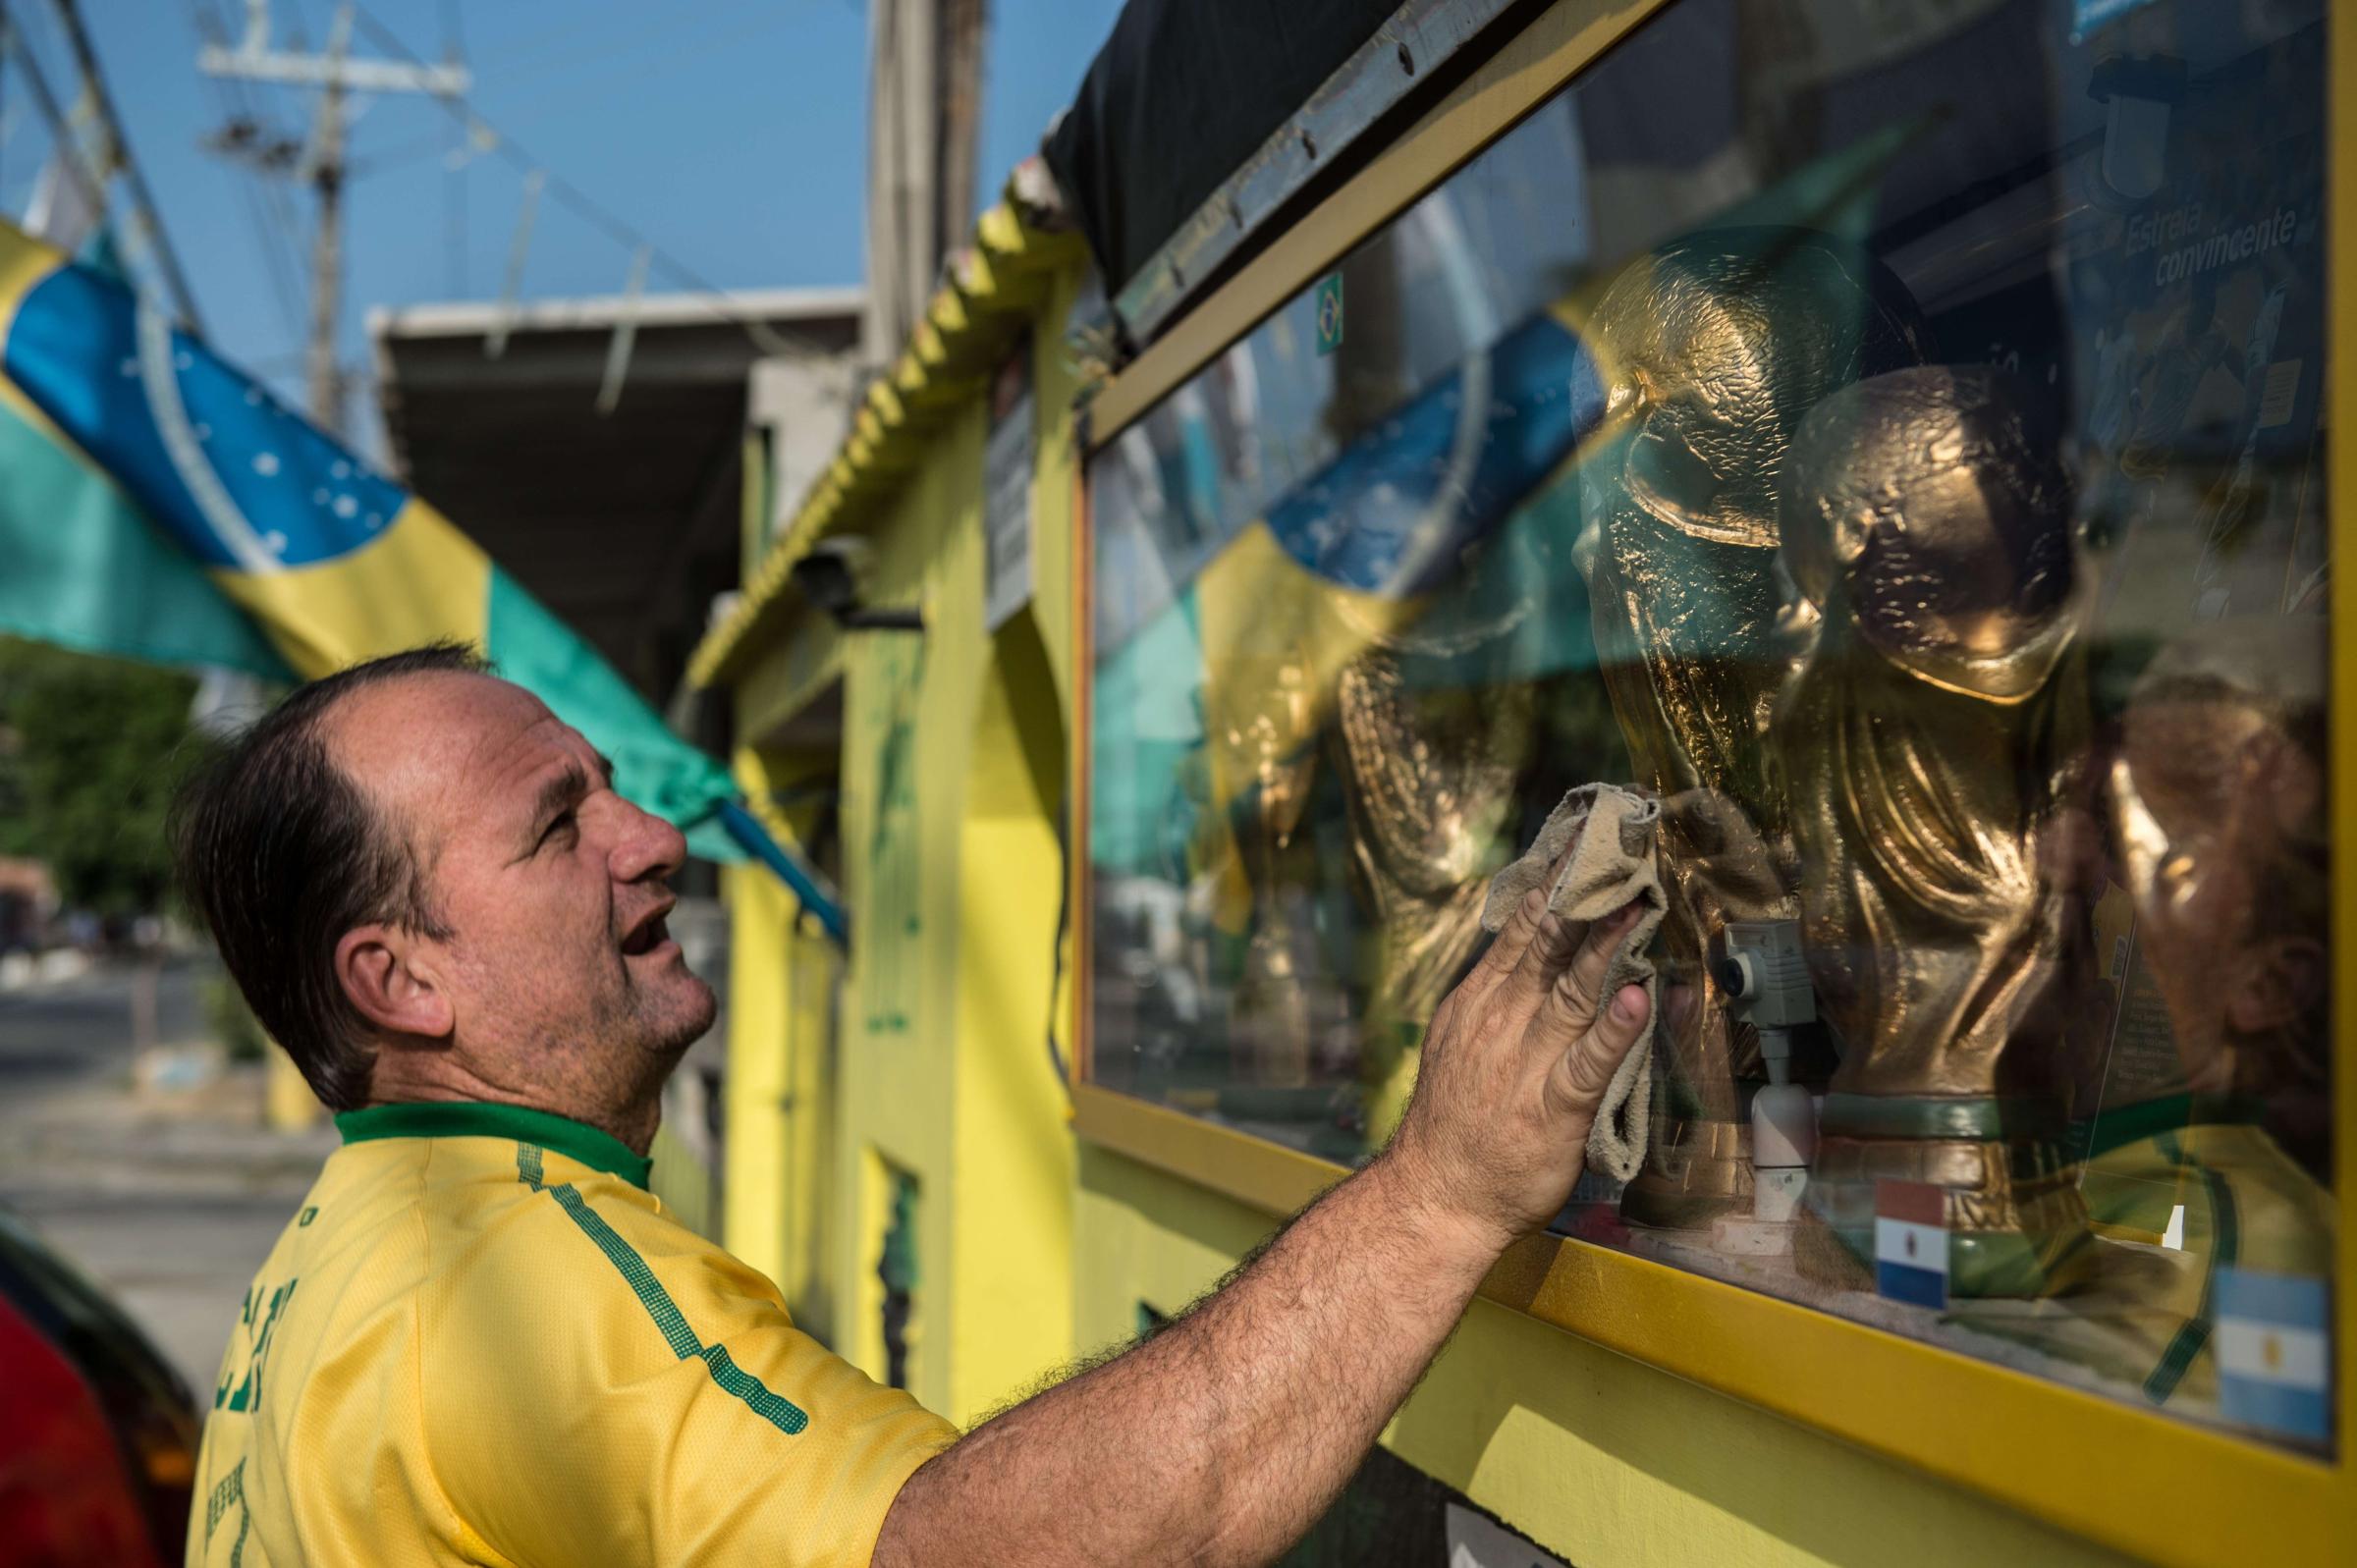 Jarbas Menighini, 46-year-old cleans the show-case set of trophies in front of his home on the day he is to see the first of four matches of the FIFA World Cup at Maracana stadium in Rio de Janeiro, Brazil, on June 18, 2014.